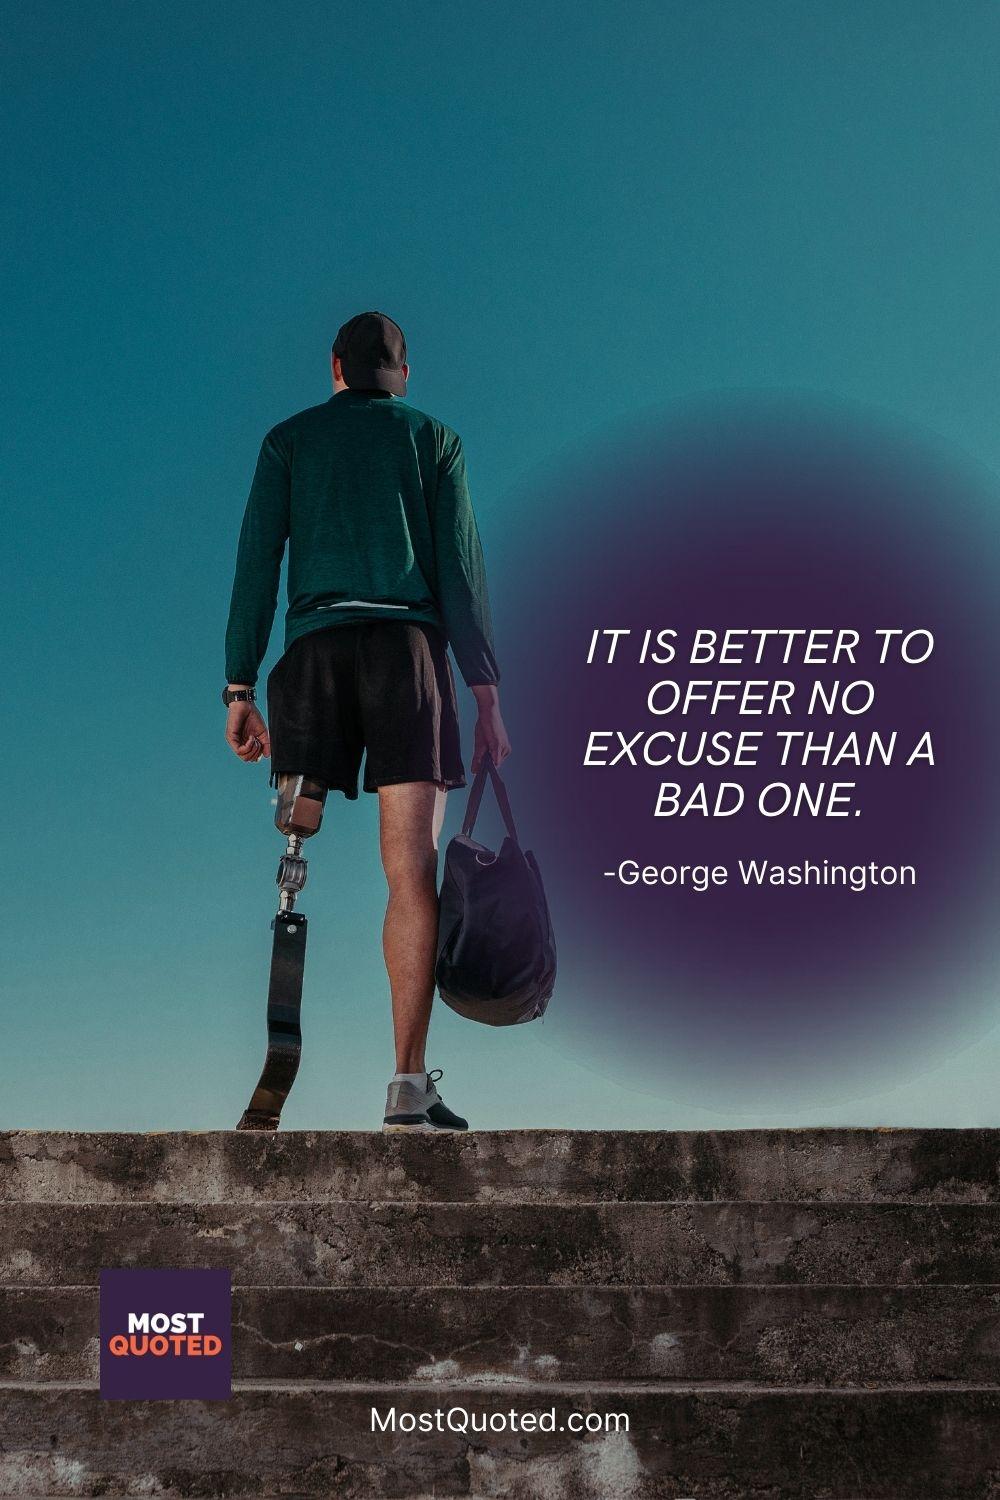 It is better to offer no excuse than a bad one. - George Washington